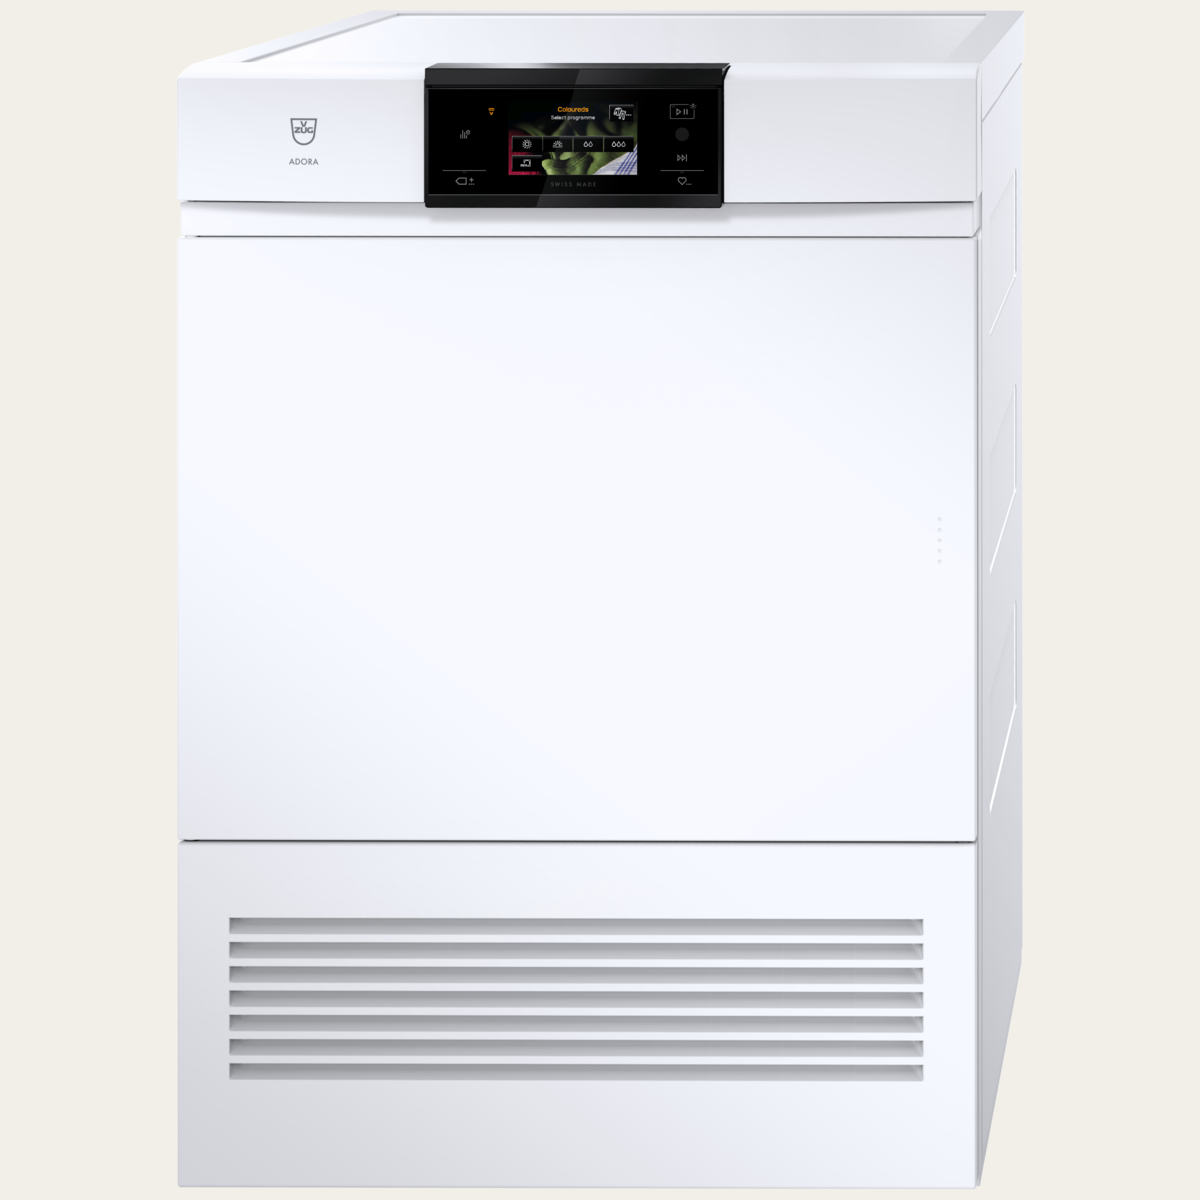 V-ZUG Tumble dryer AdoraDry V2000, Door hinge: Left,V-ZUG-Home, Nominal capacity: 7 kg, Full-colour graphic display, Air transport according to UN 3358 prohibited